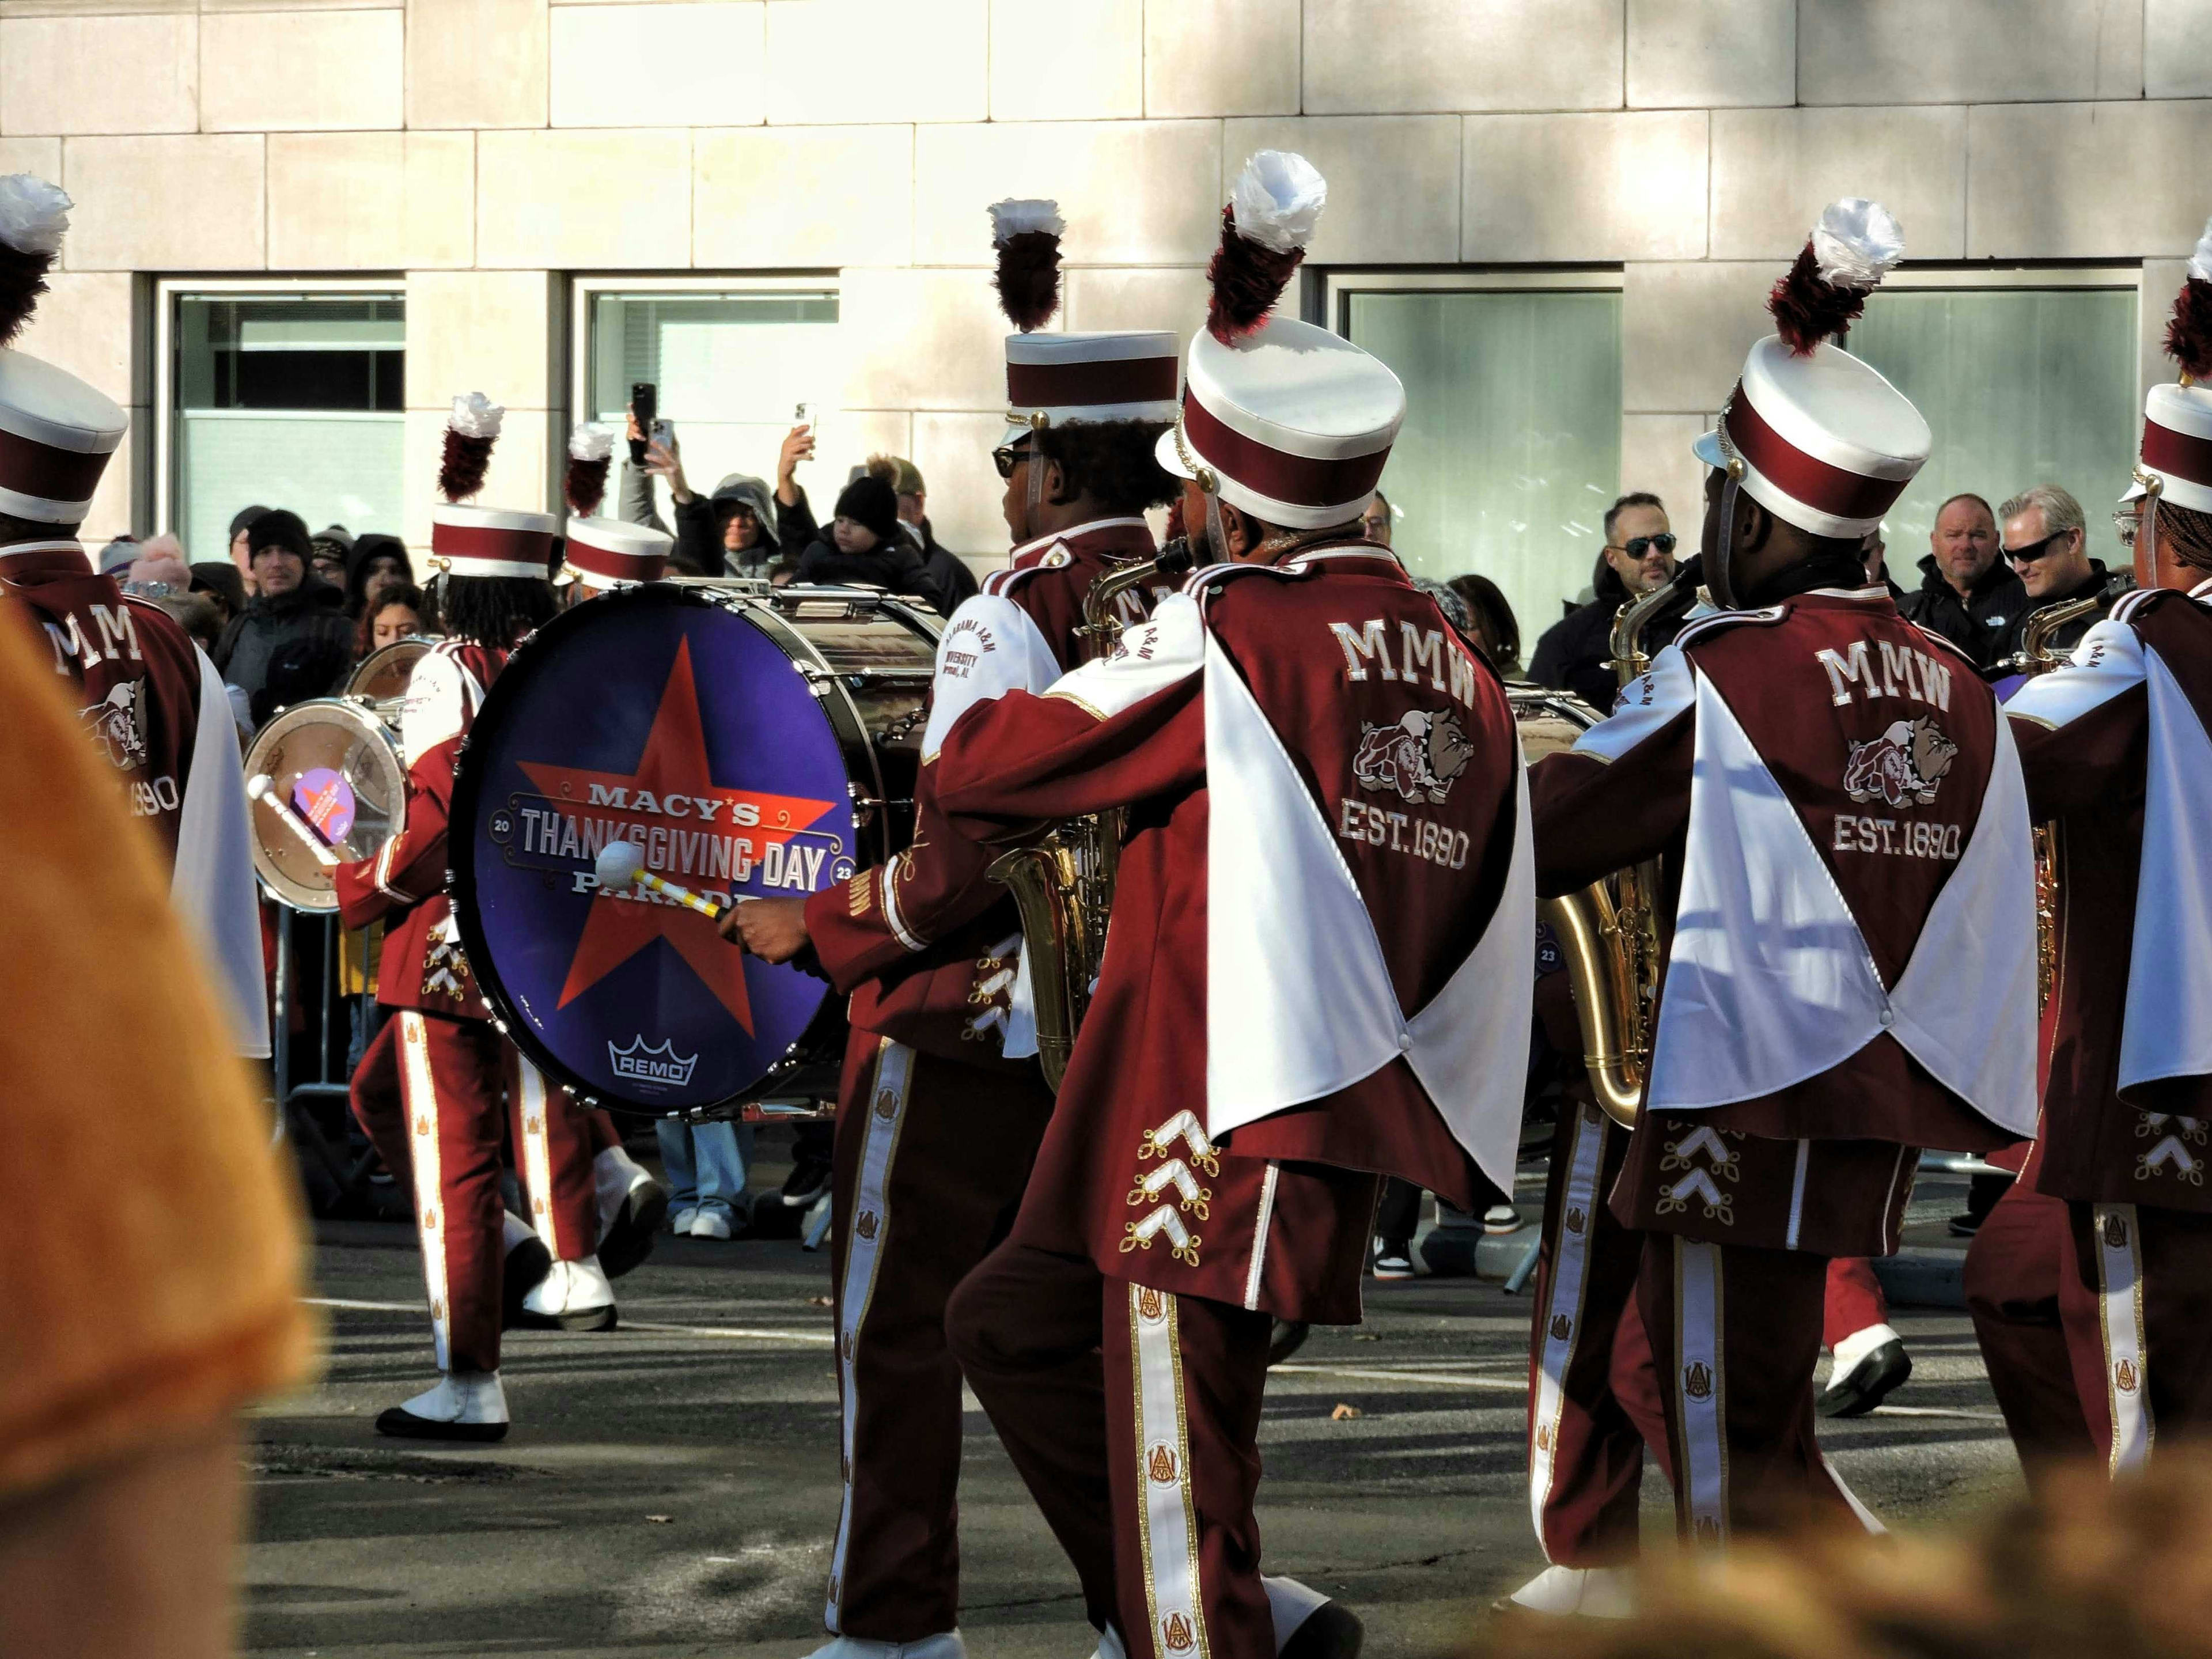 Musicians in the Macy's parade